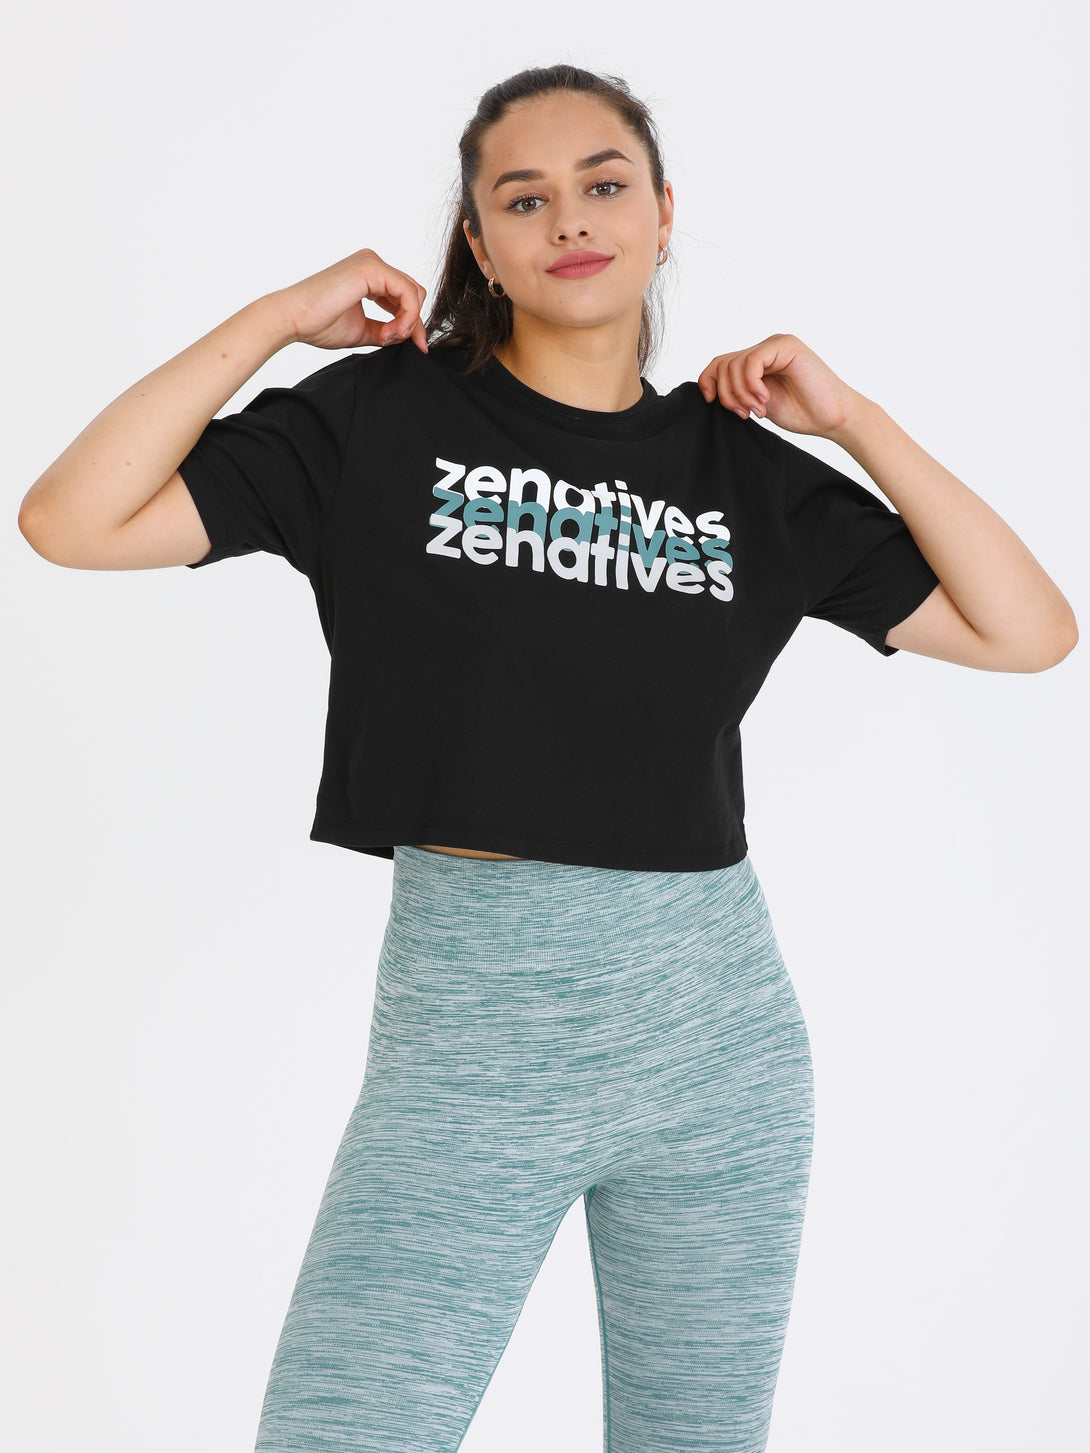 A Woman Wearing Black Color Zen And Chill Crop Tee